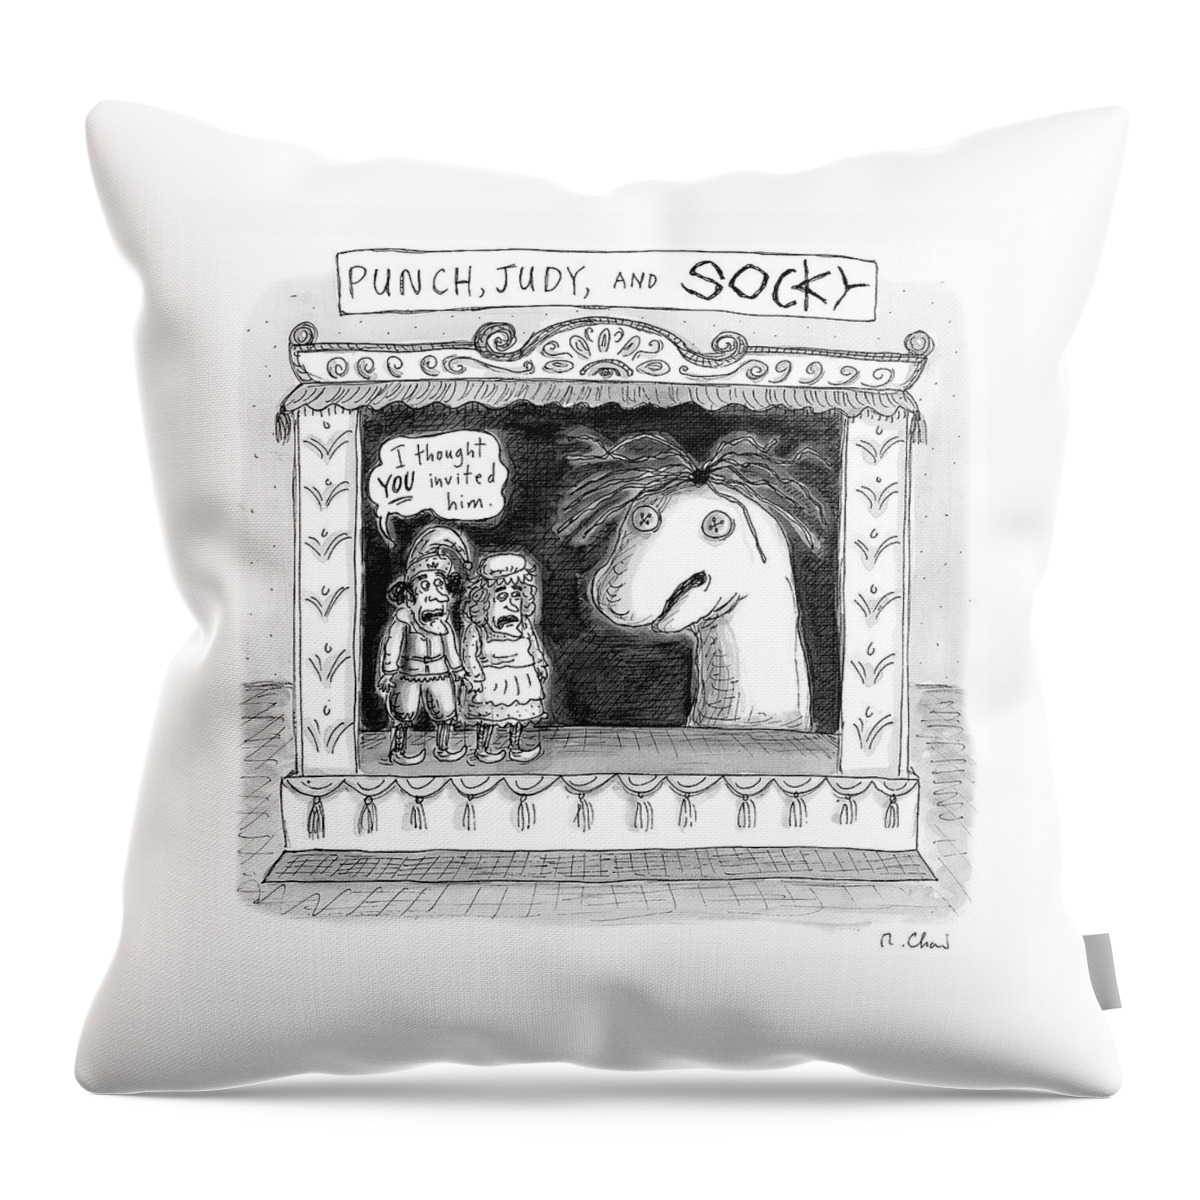 Punch, Judy And Socky Throw Pillow